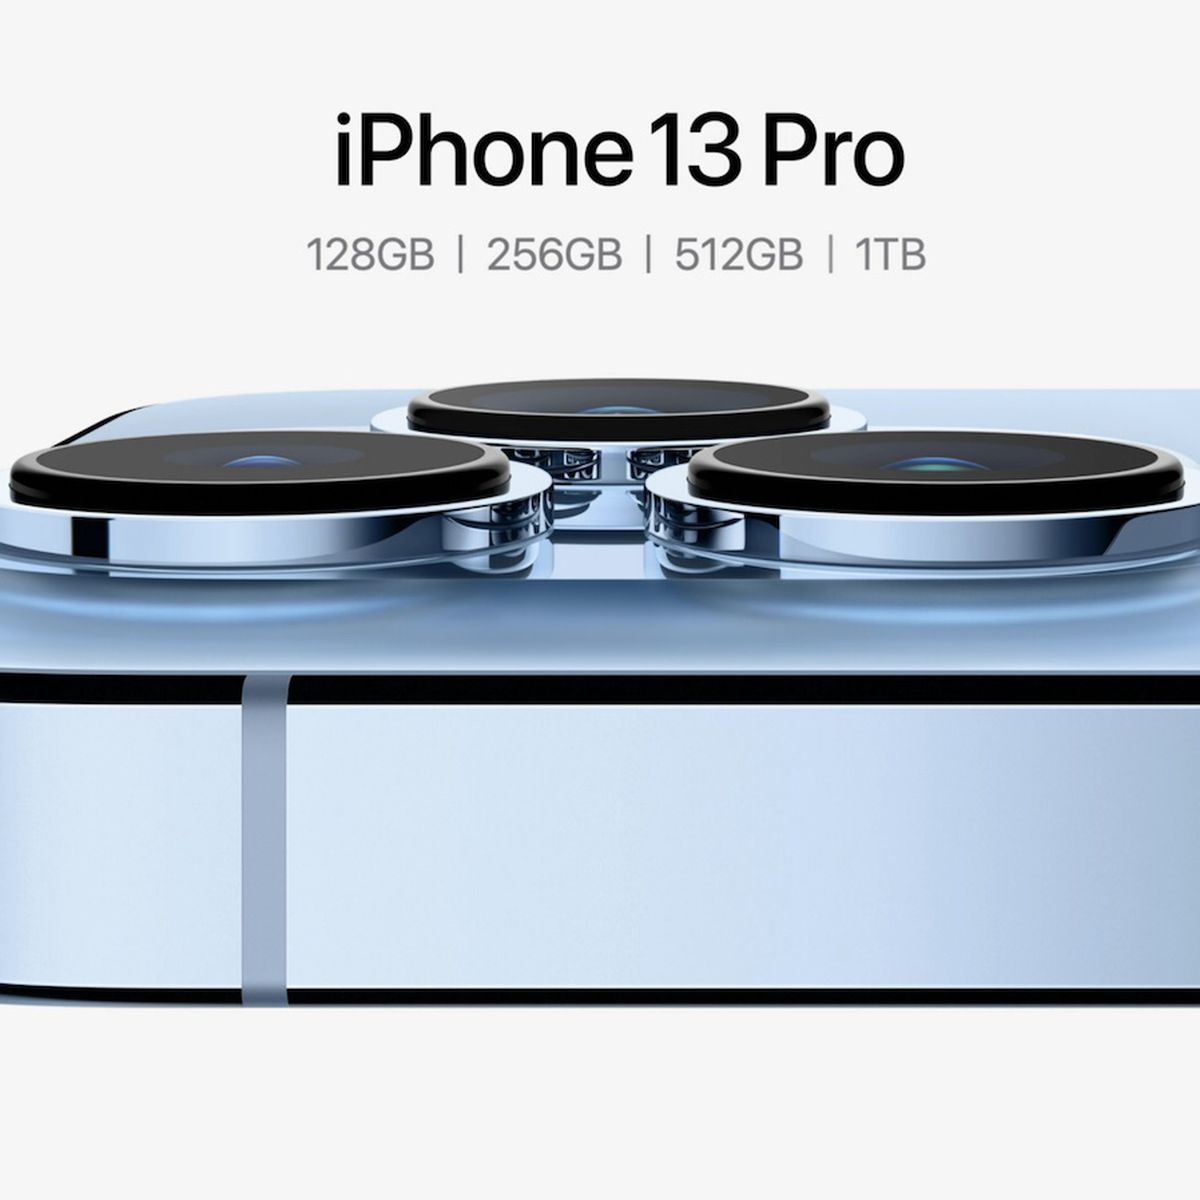 iPhone 13 Pro Available With Up to 1TB of Storage, Pricing Tops Out at  Record $1,599 - MacRumors